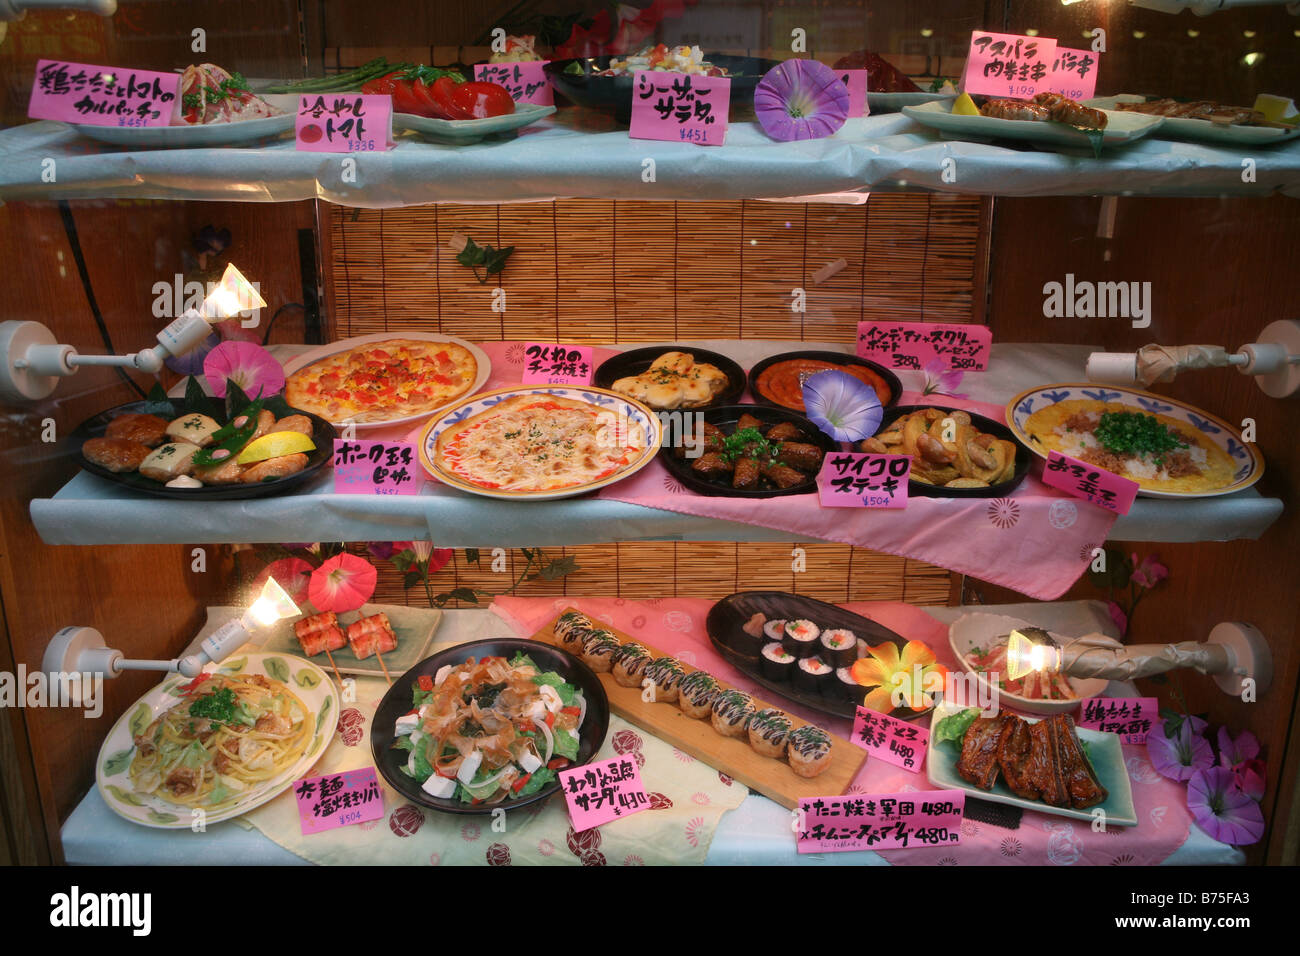 artificial plastic food made of cilicones is used for display in restaurants to see what dishes are available Stock Photo